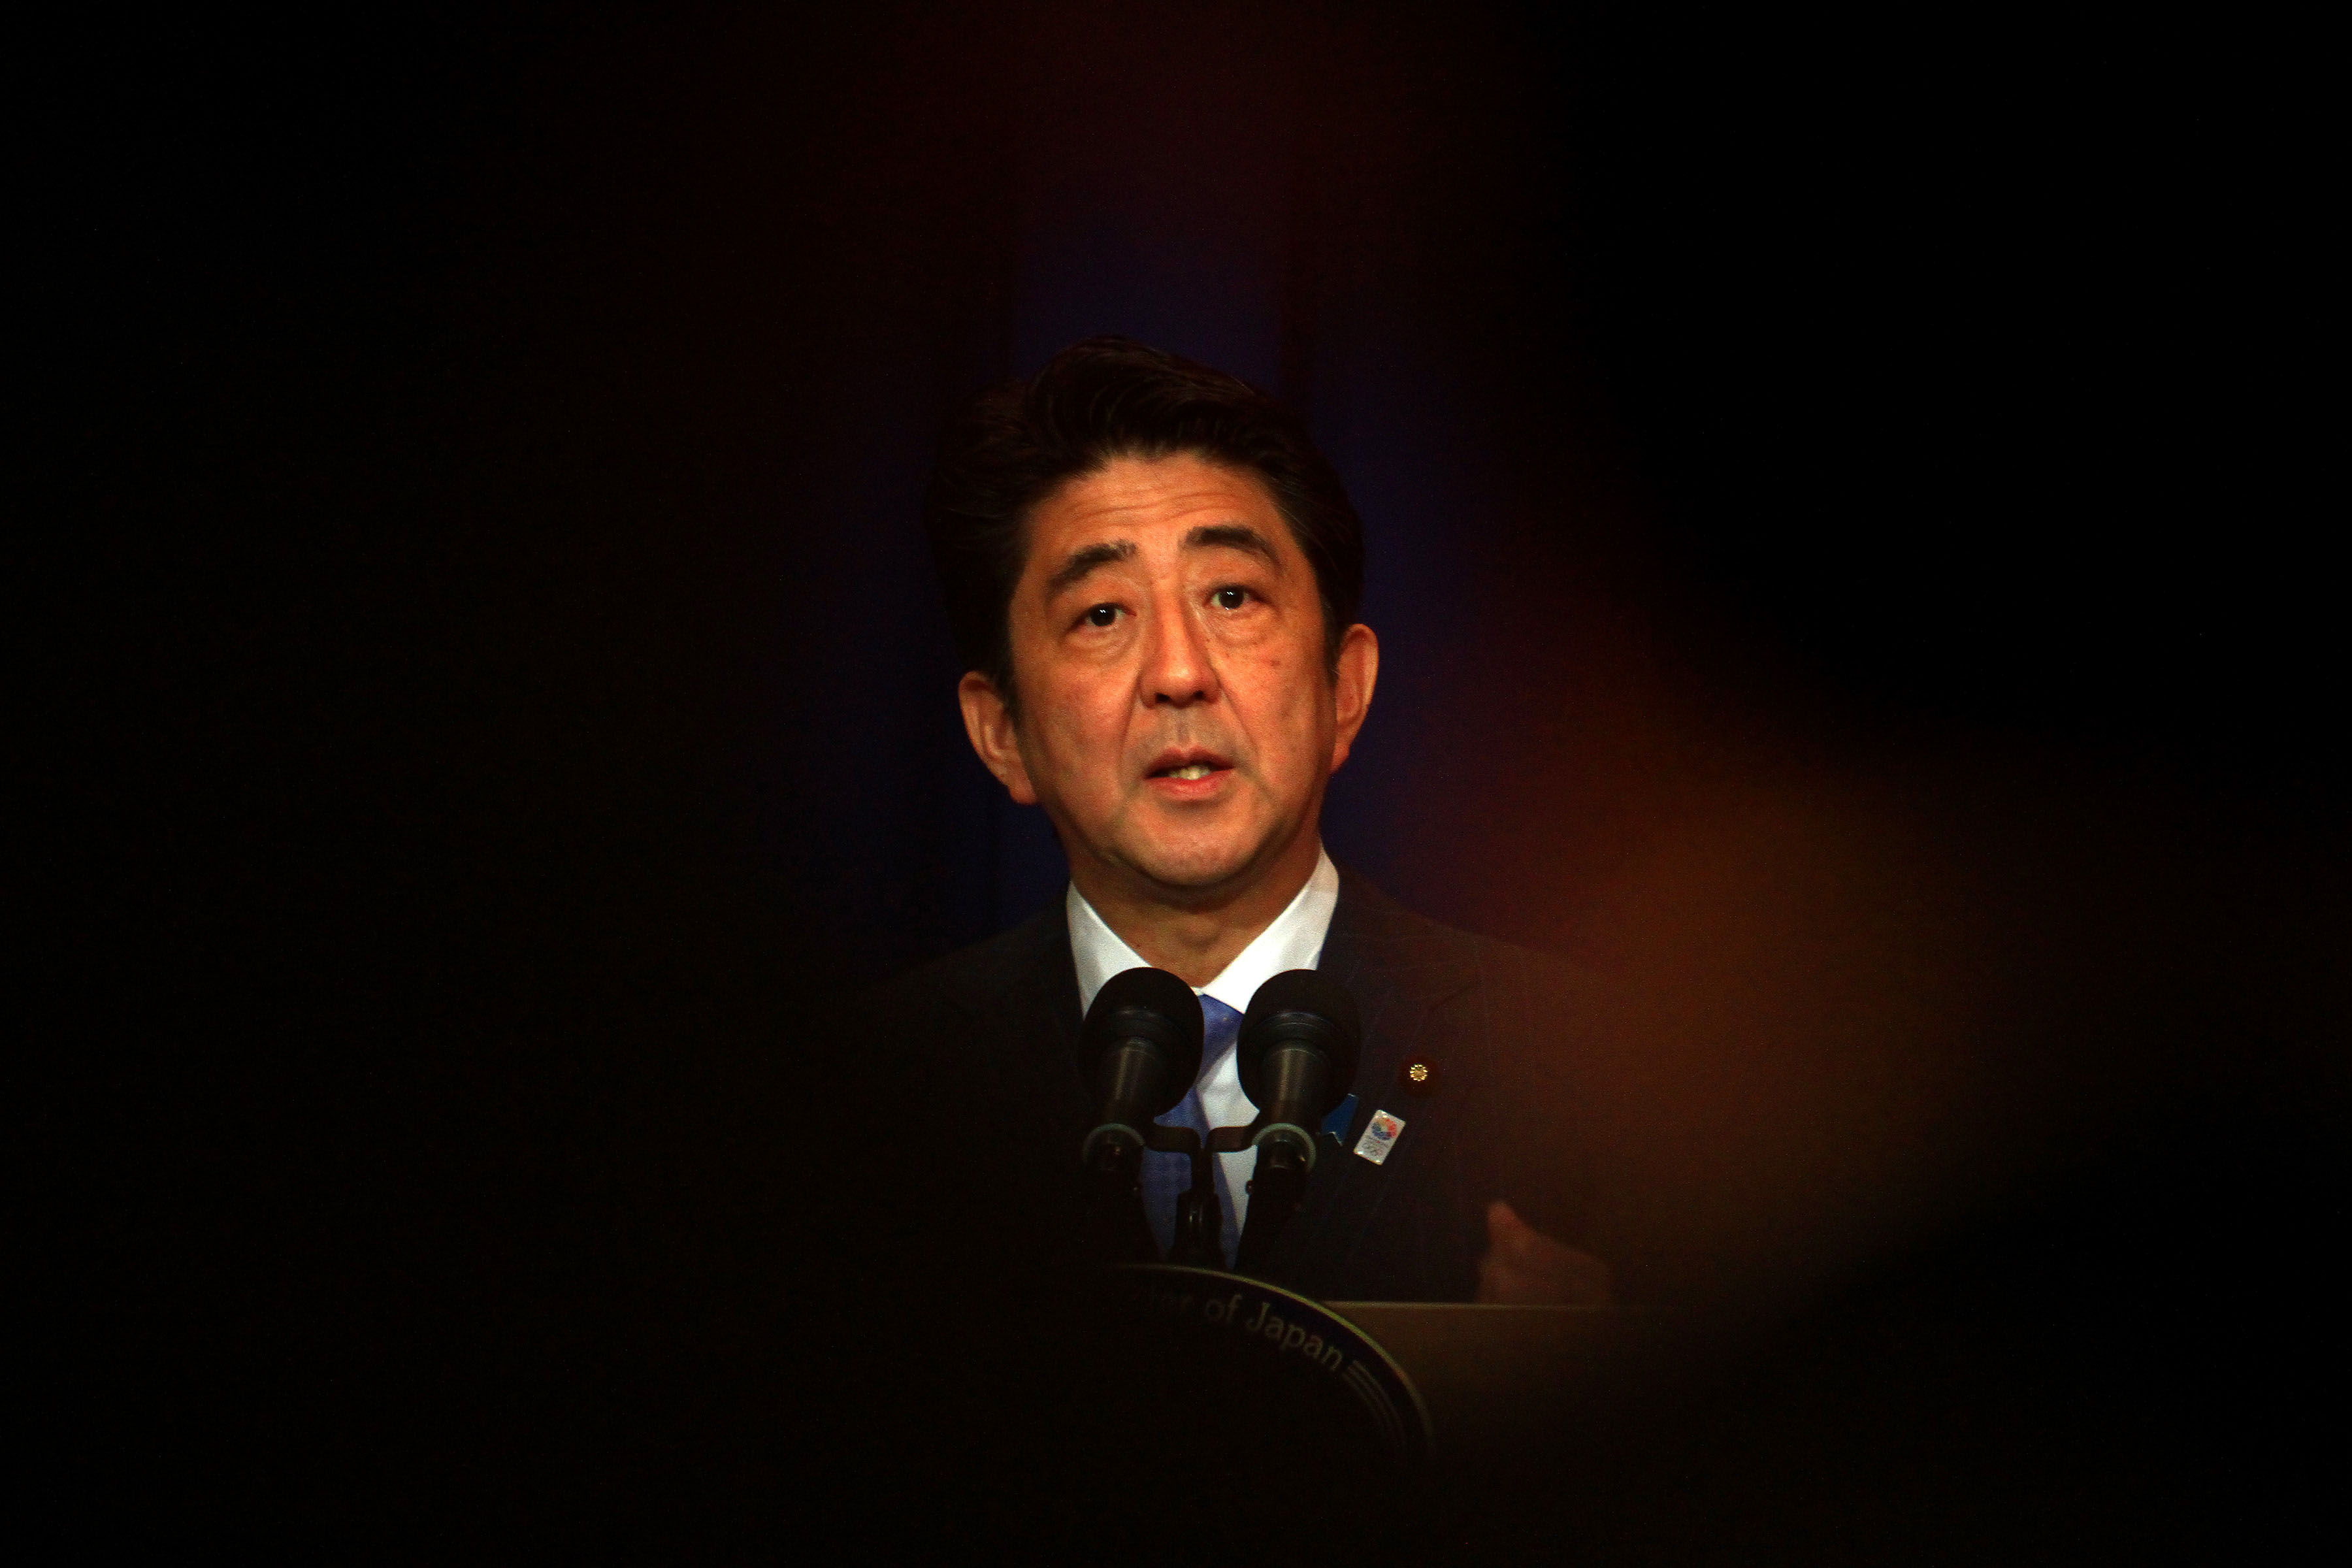 Japan's Prime Minister Shinzo Abe during a news conference in Makati City, the Philippines, on July 27, 2013.  